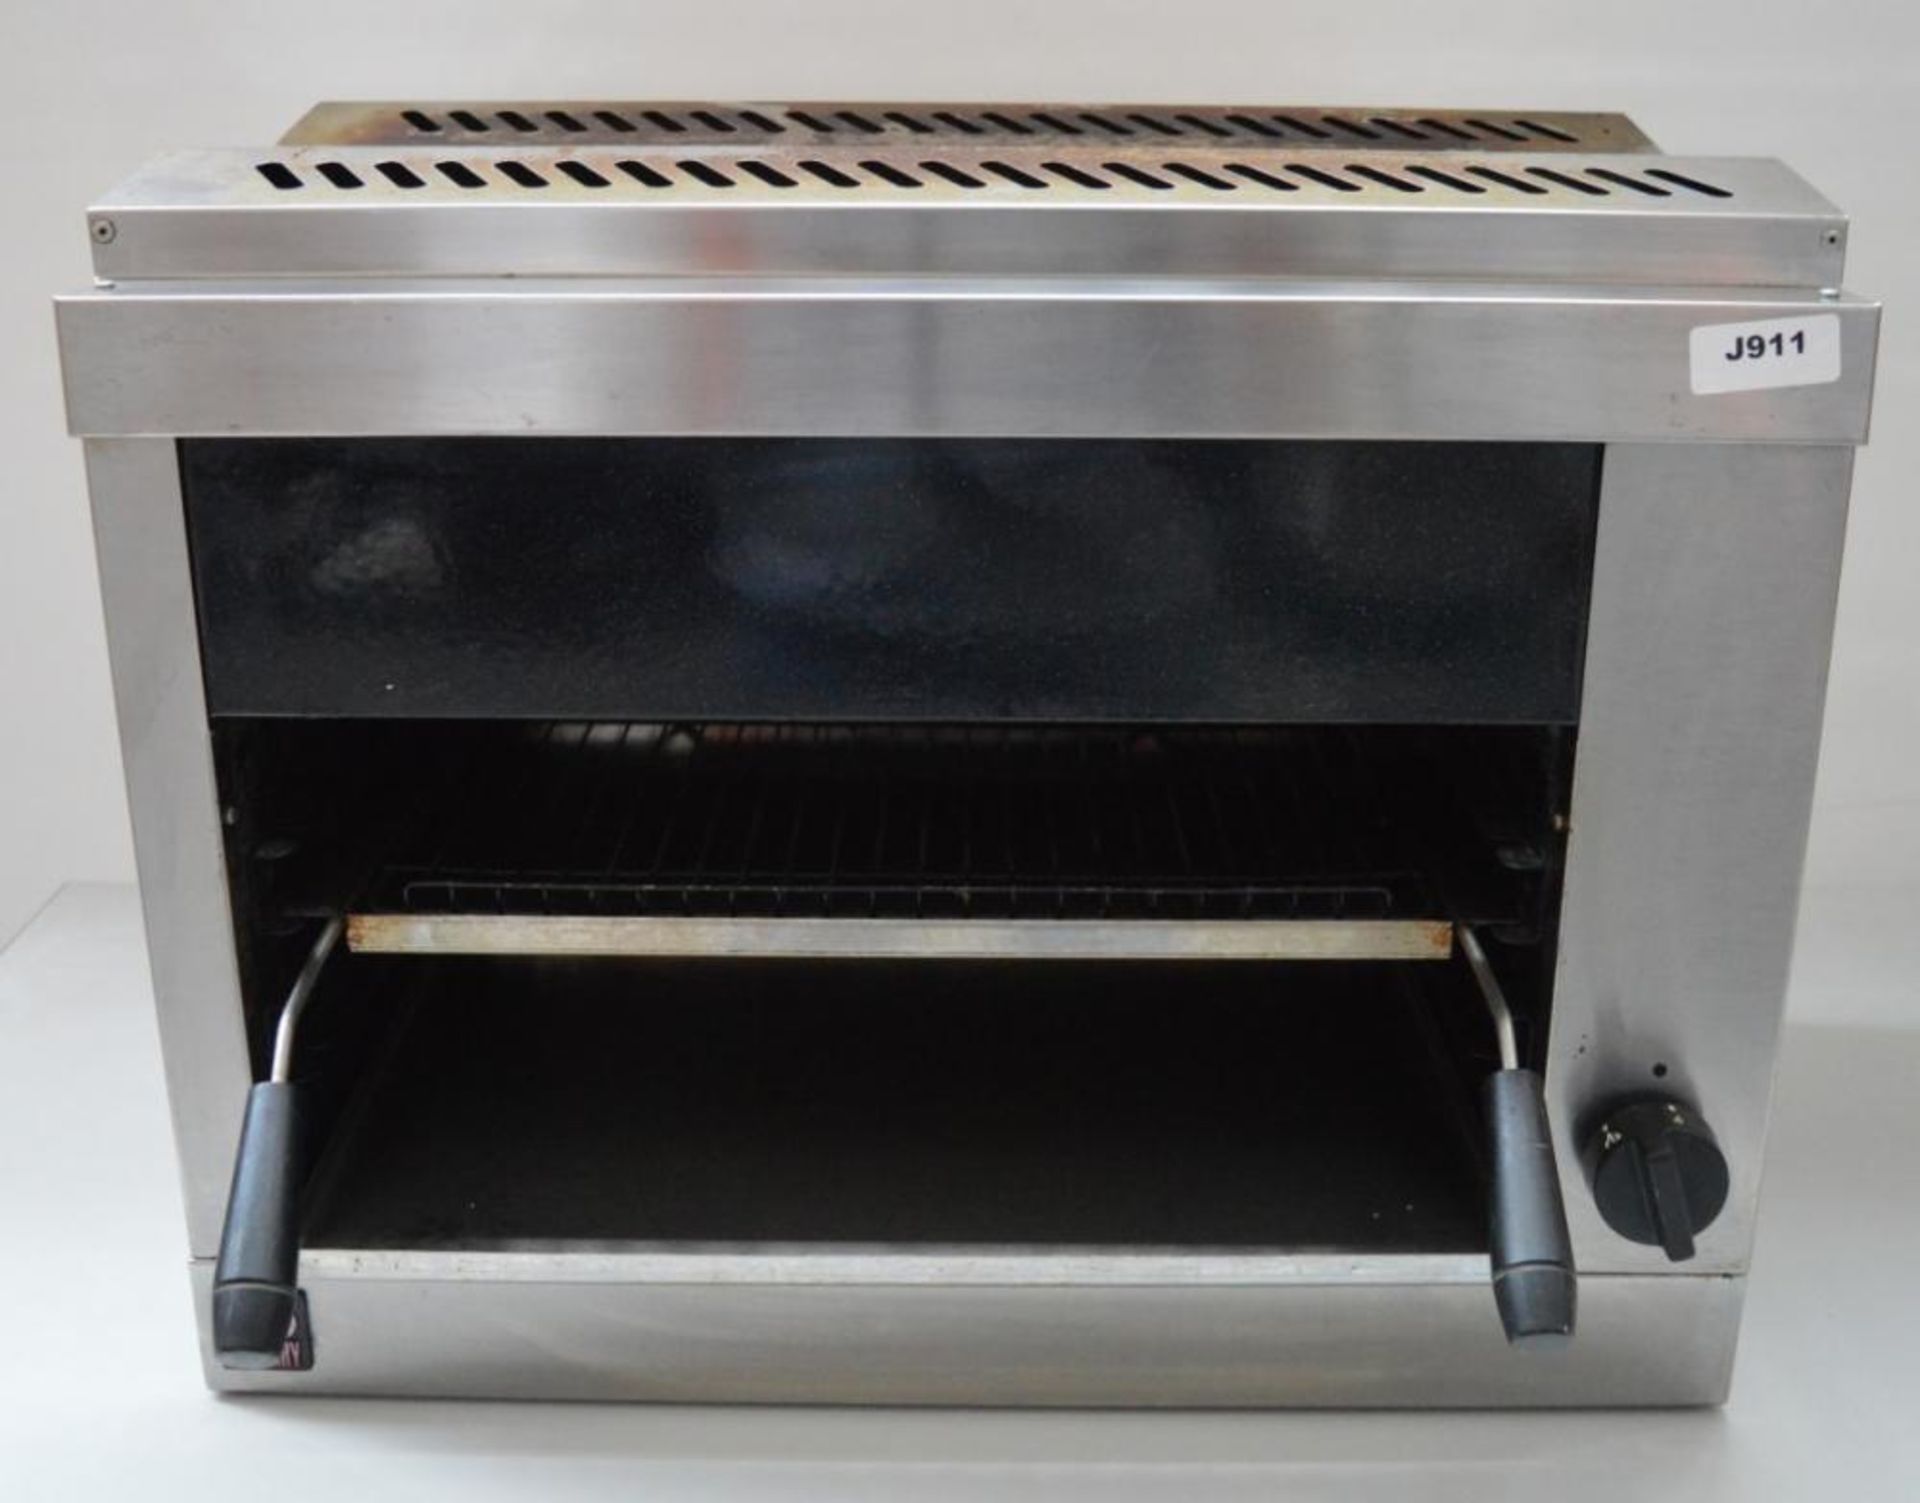 1 x Parry Stainless Steel Natural Gas Salamander Grill - H48 x W60 x D37 cms - CL290 - Ref J911 -